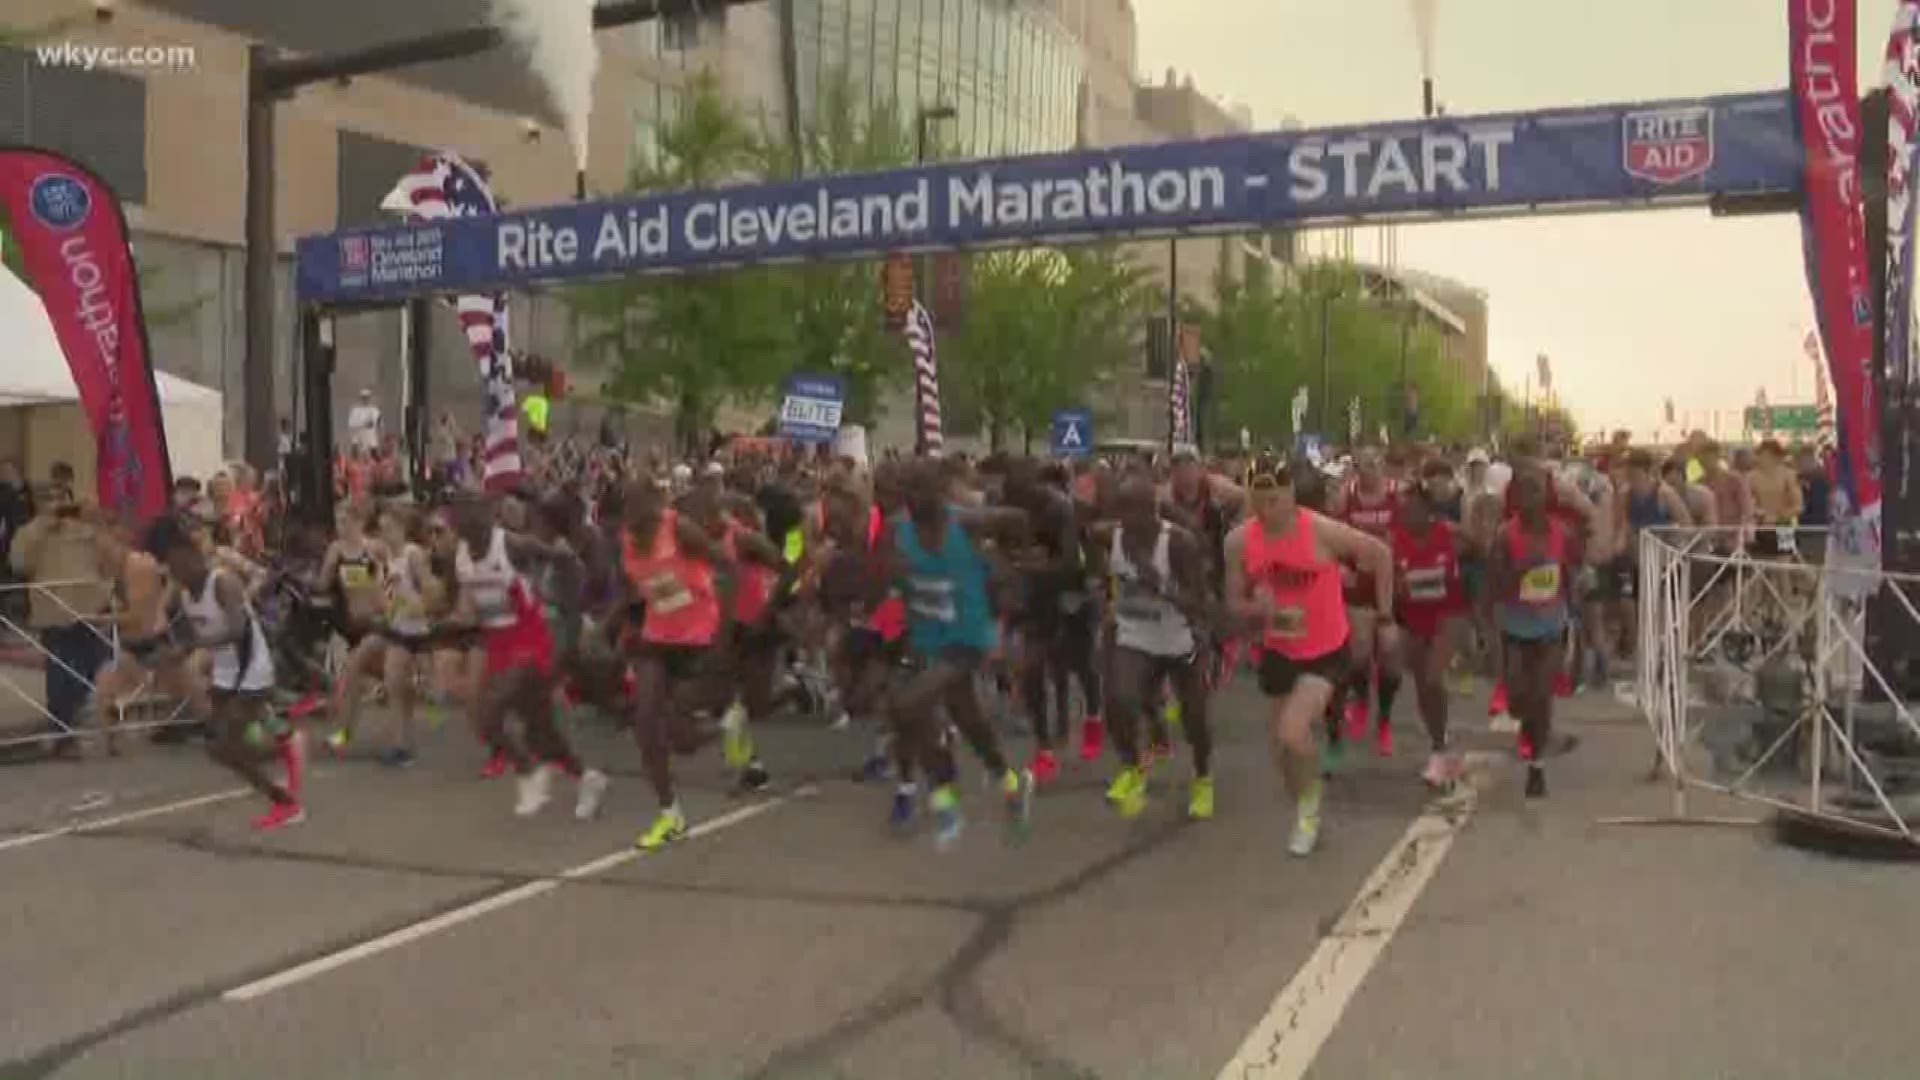 And they're off!  See the official start to the 2019 Rite Aid Cleveland Marathon.